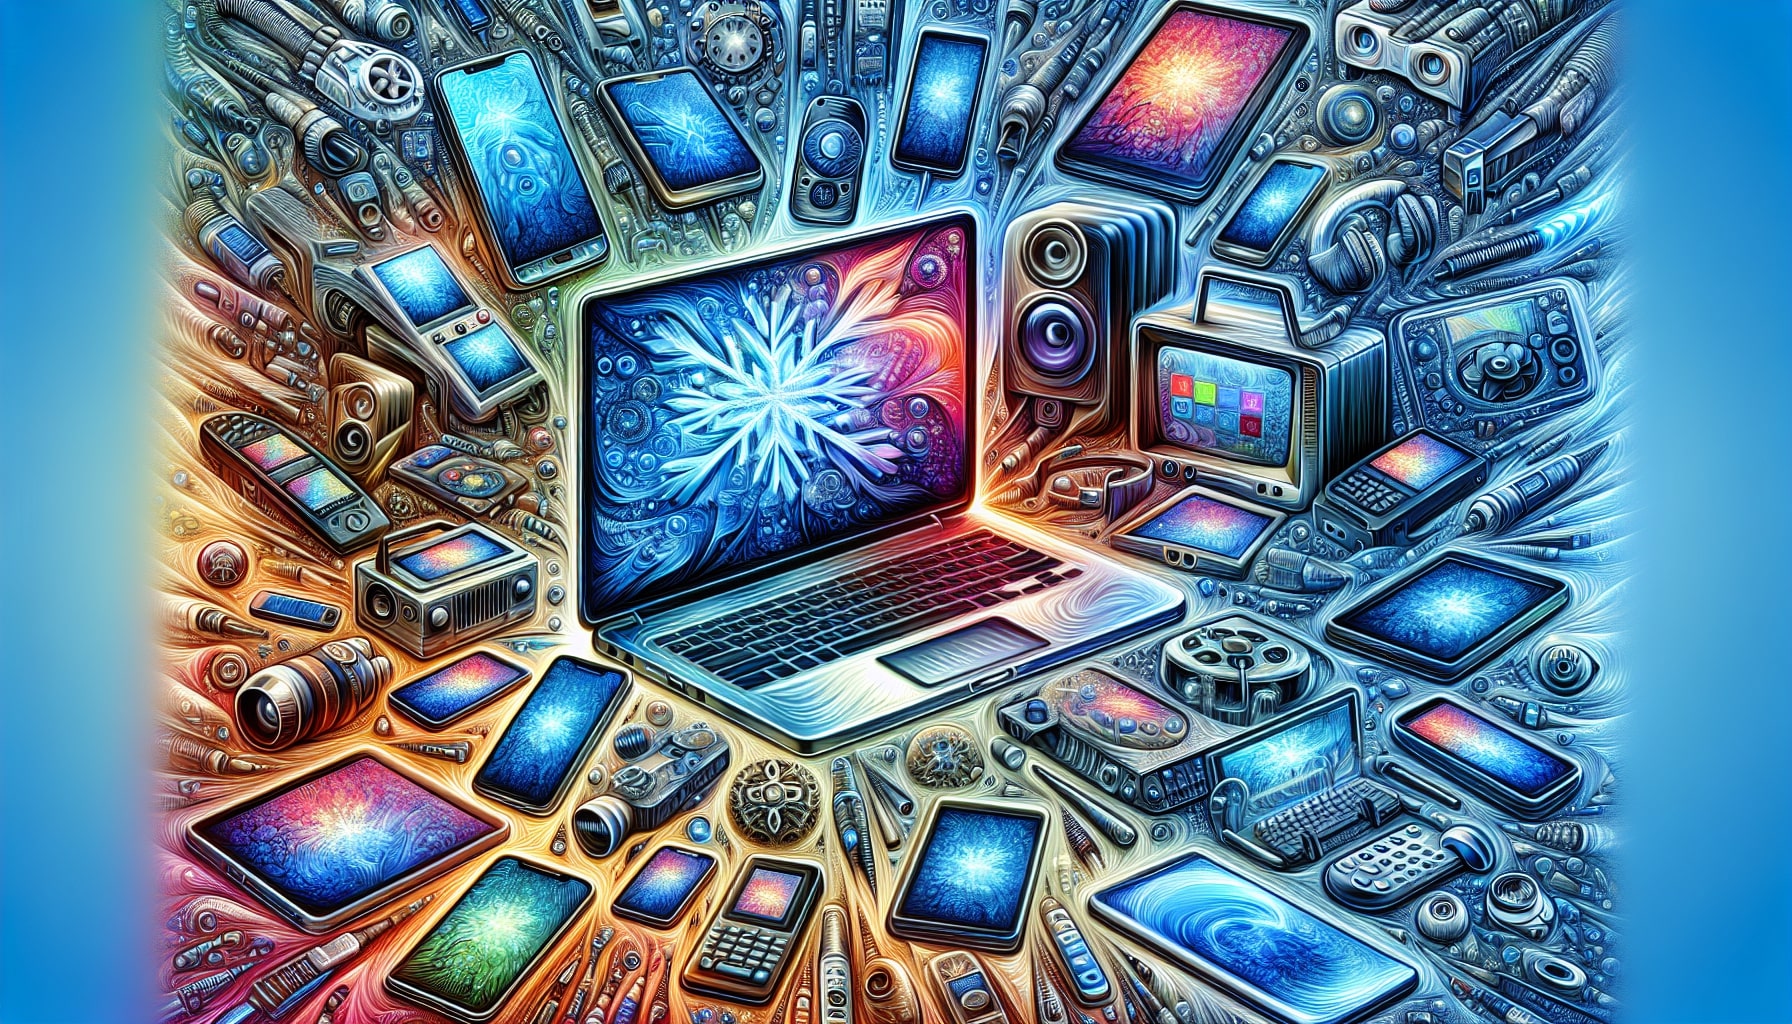 Vibrant digital technology and electronics collage art.